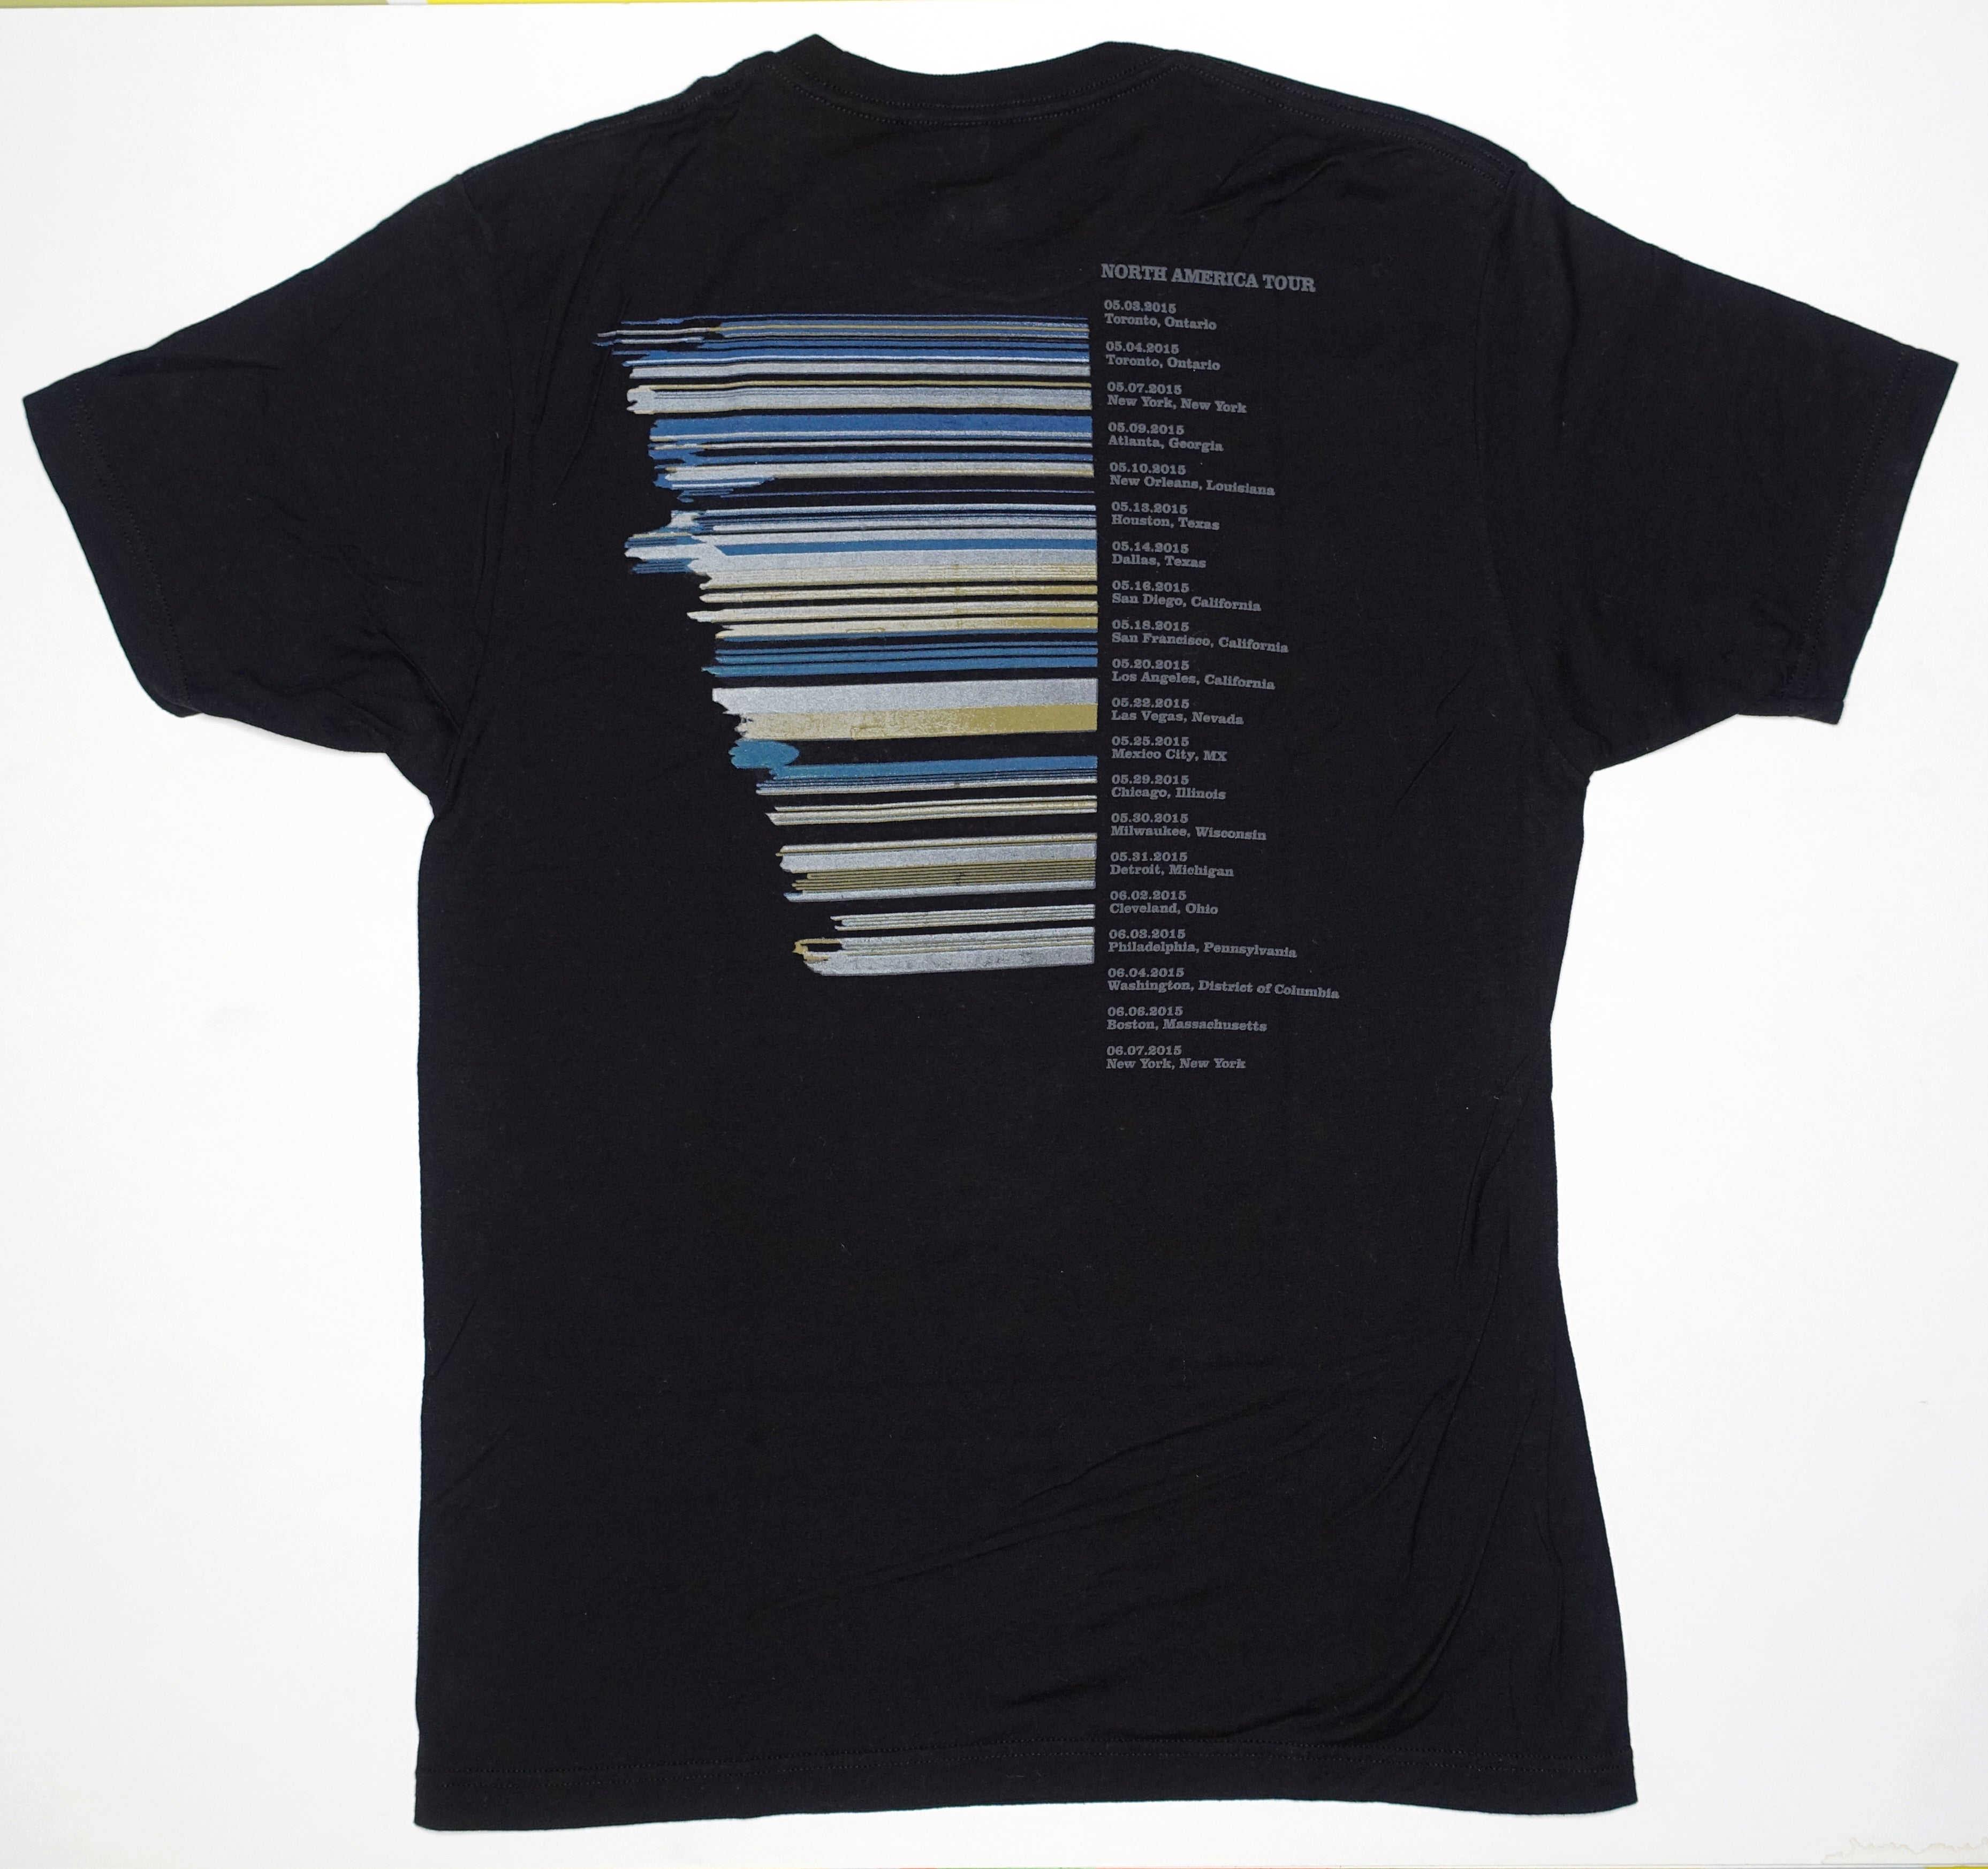 Noel Gallagher's High Flying Birds -  "Lines" North American 2015 Tour Shirt Size Large